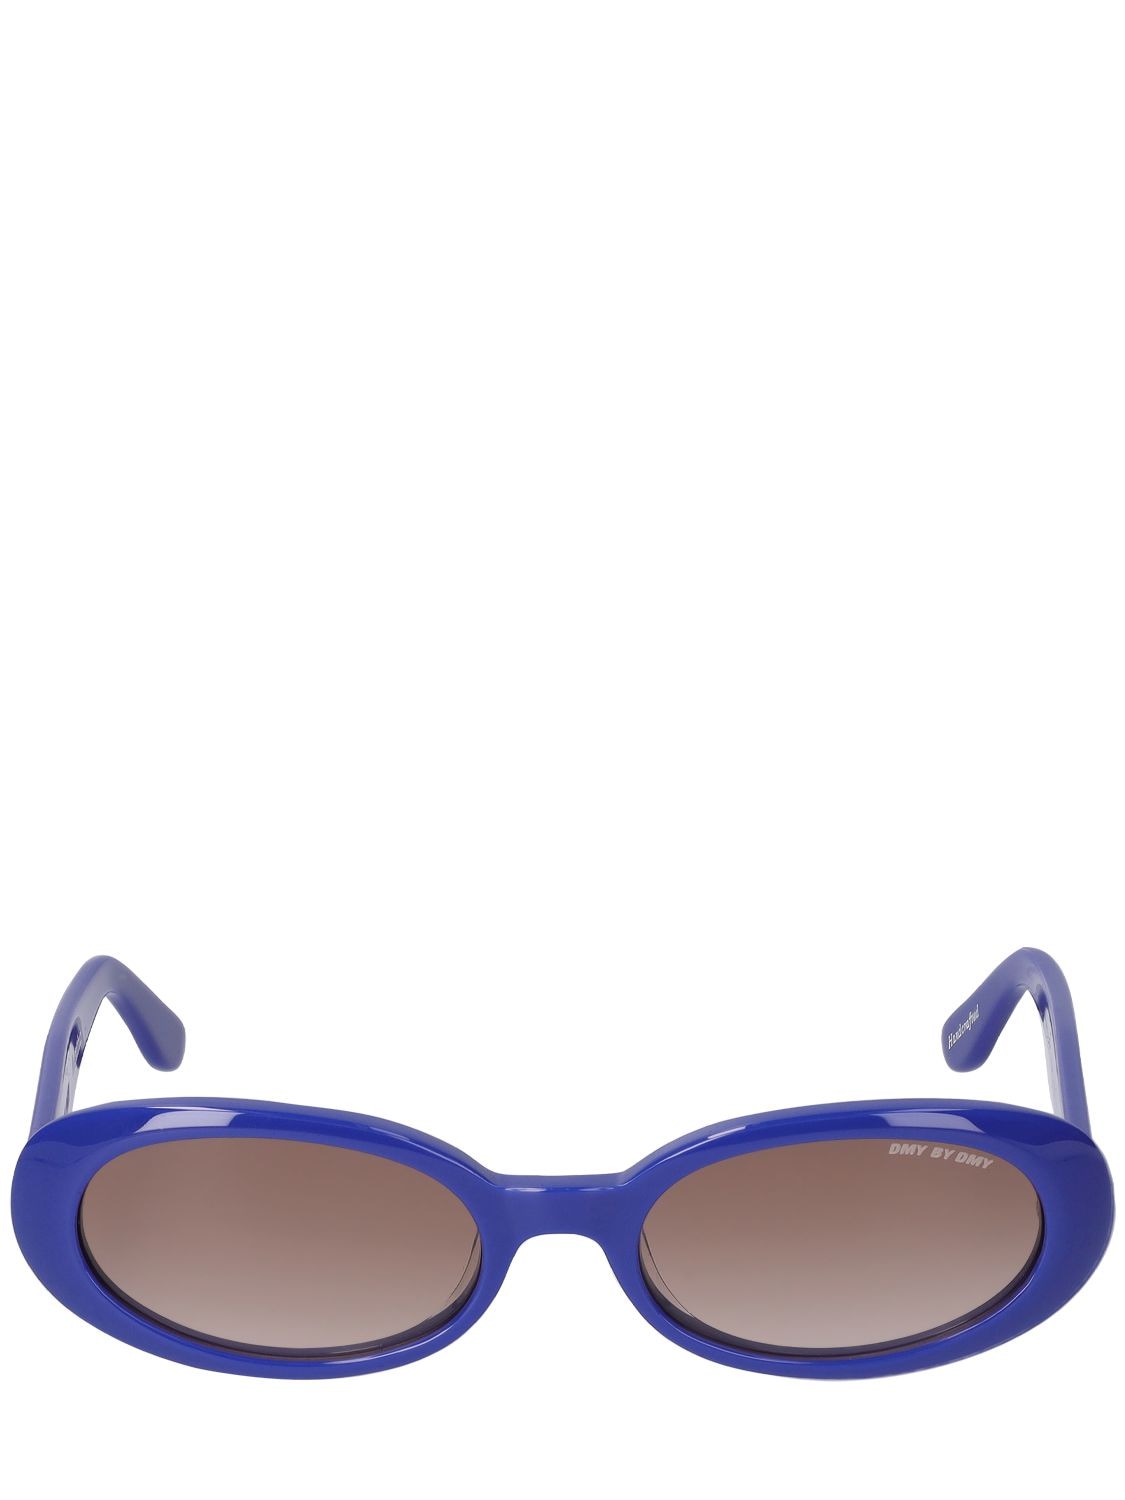 DMY BY DMY Valentina Oval Acetate Sunglasses